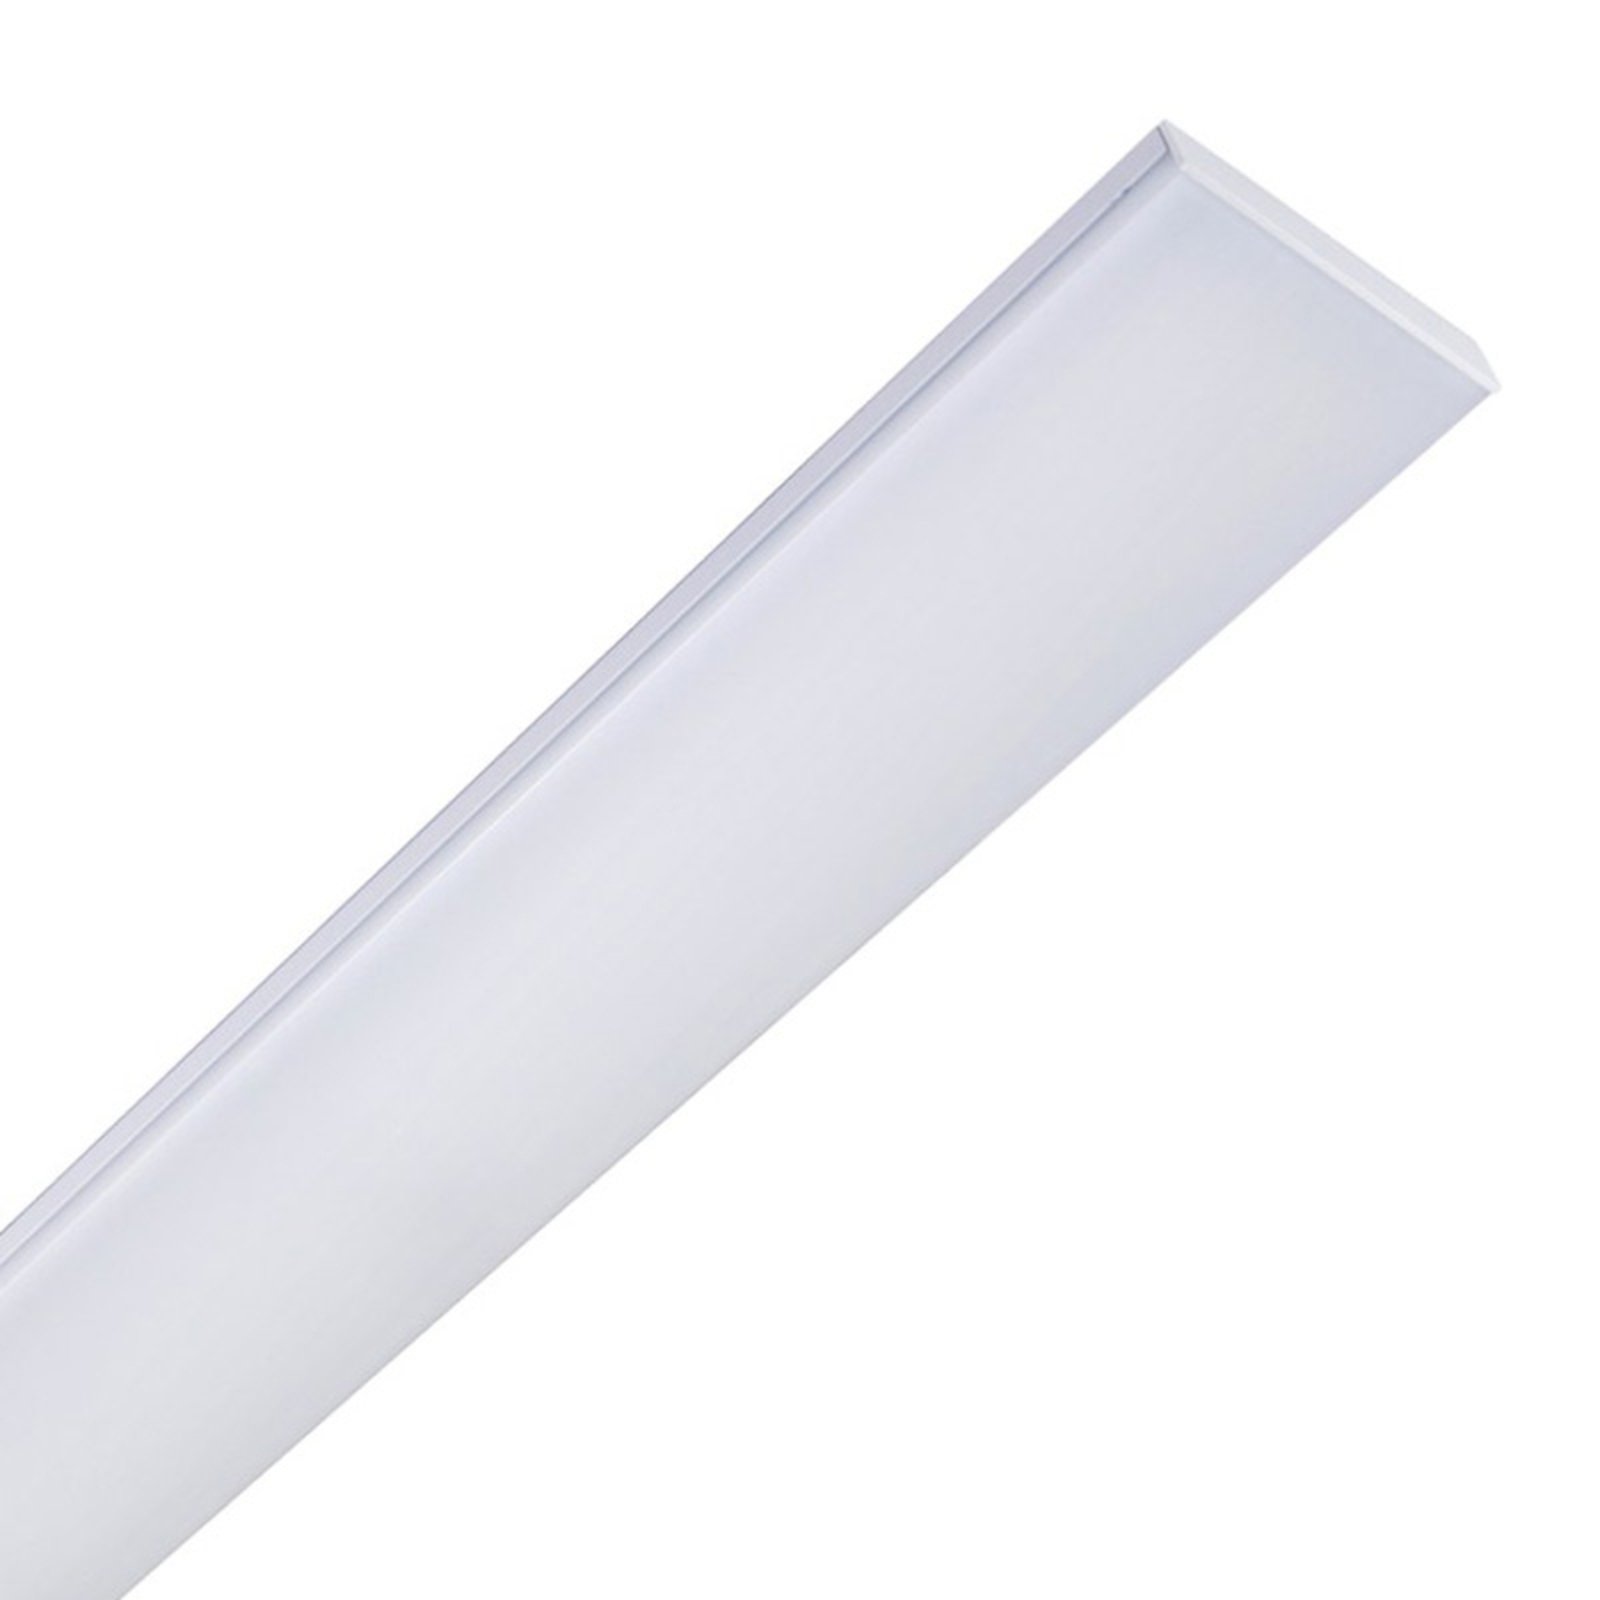 Planus 60 LED ceiling lamp with cool white LEDs